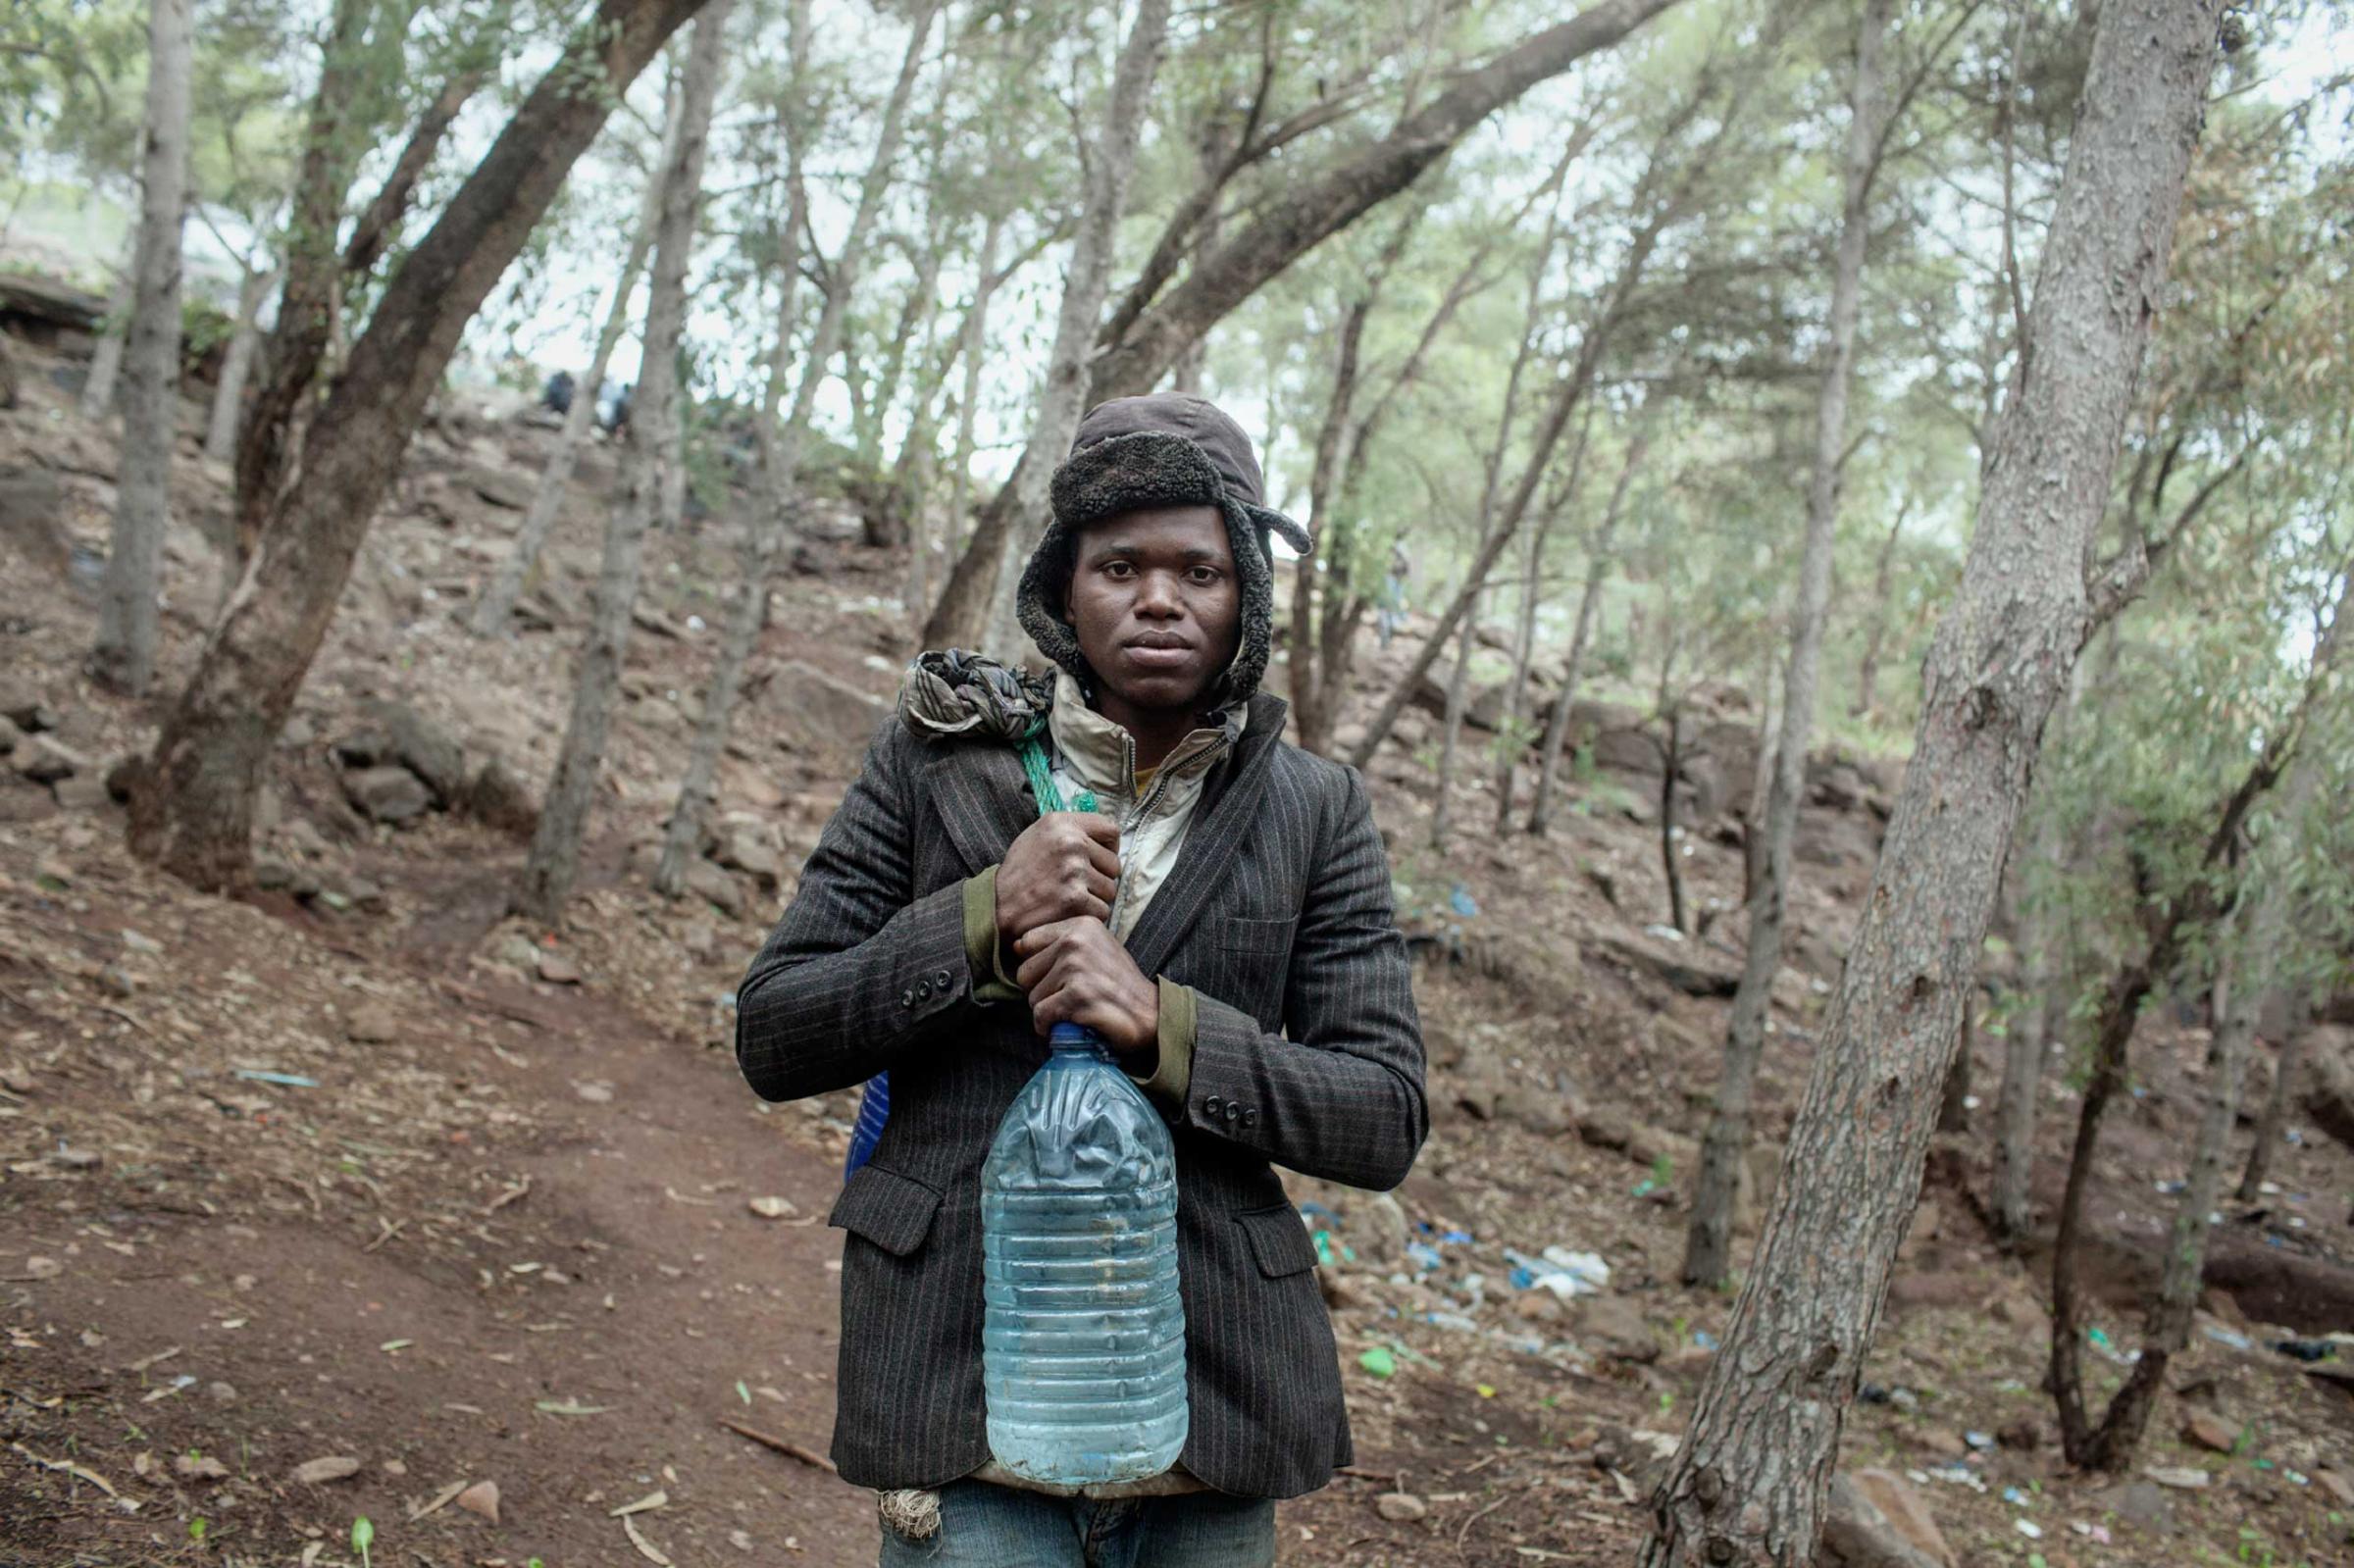 Portrait of a sub-Saharan migrant on Mount Gurugu, Nador, Morocco in 2012, where hundreds of African immigrants living in precarious conditions waited for the opportunity to cross the fence into Melilla, Spain. The enclave's border had heavy security, including a six-meter tall double fence with watchtowers.